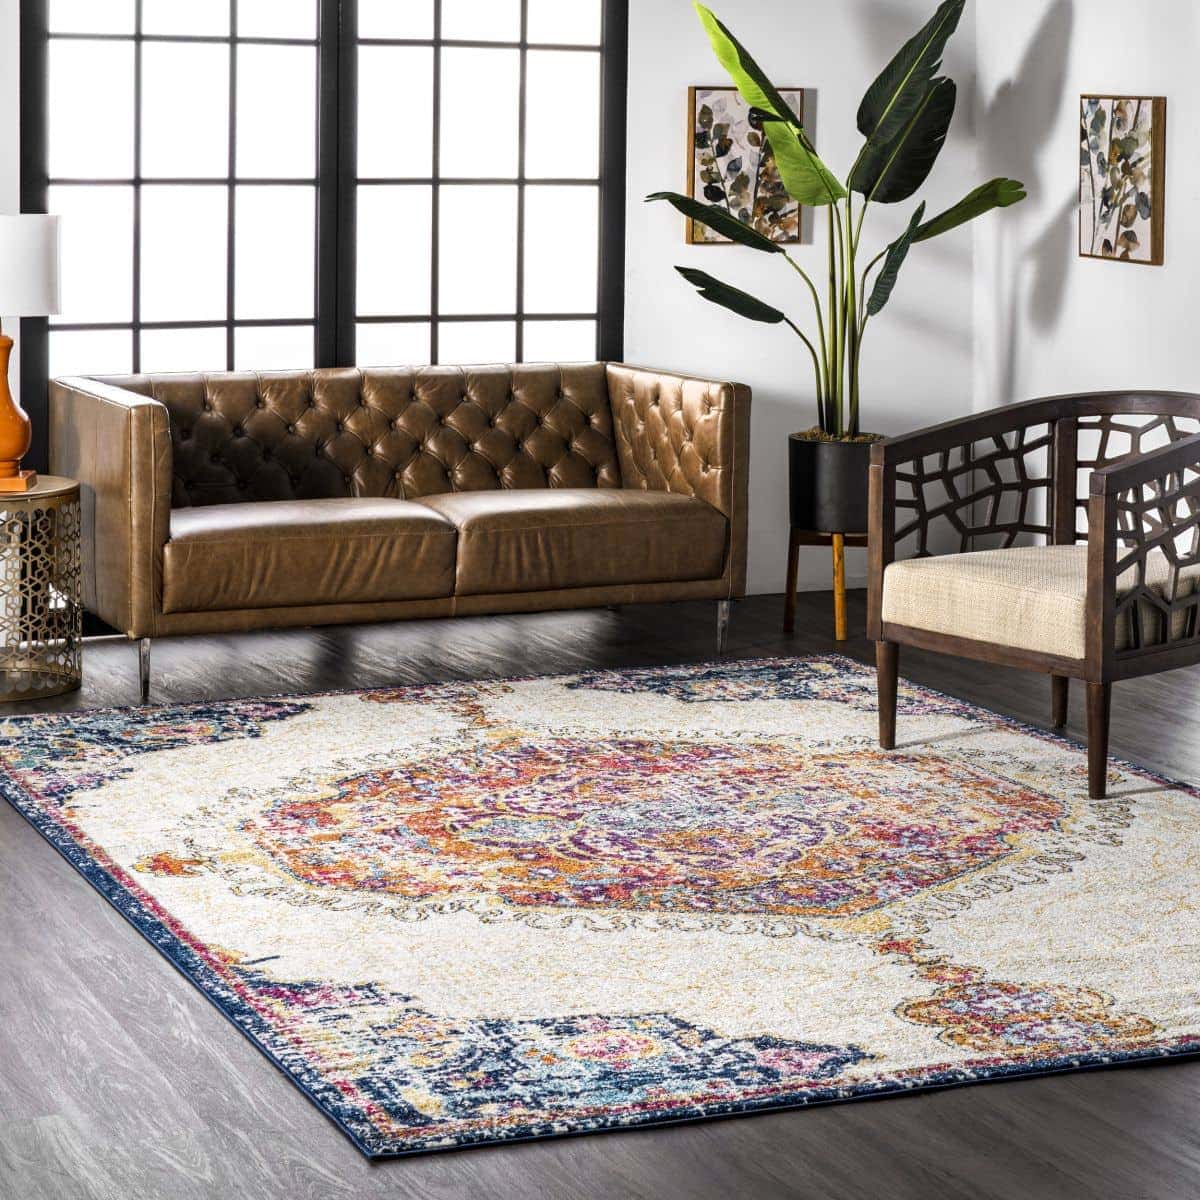 25 Gorgeous Rugs That Go With Brown Couches, Rooms To Go Area Rugs